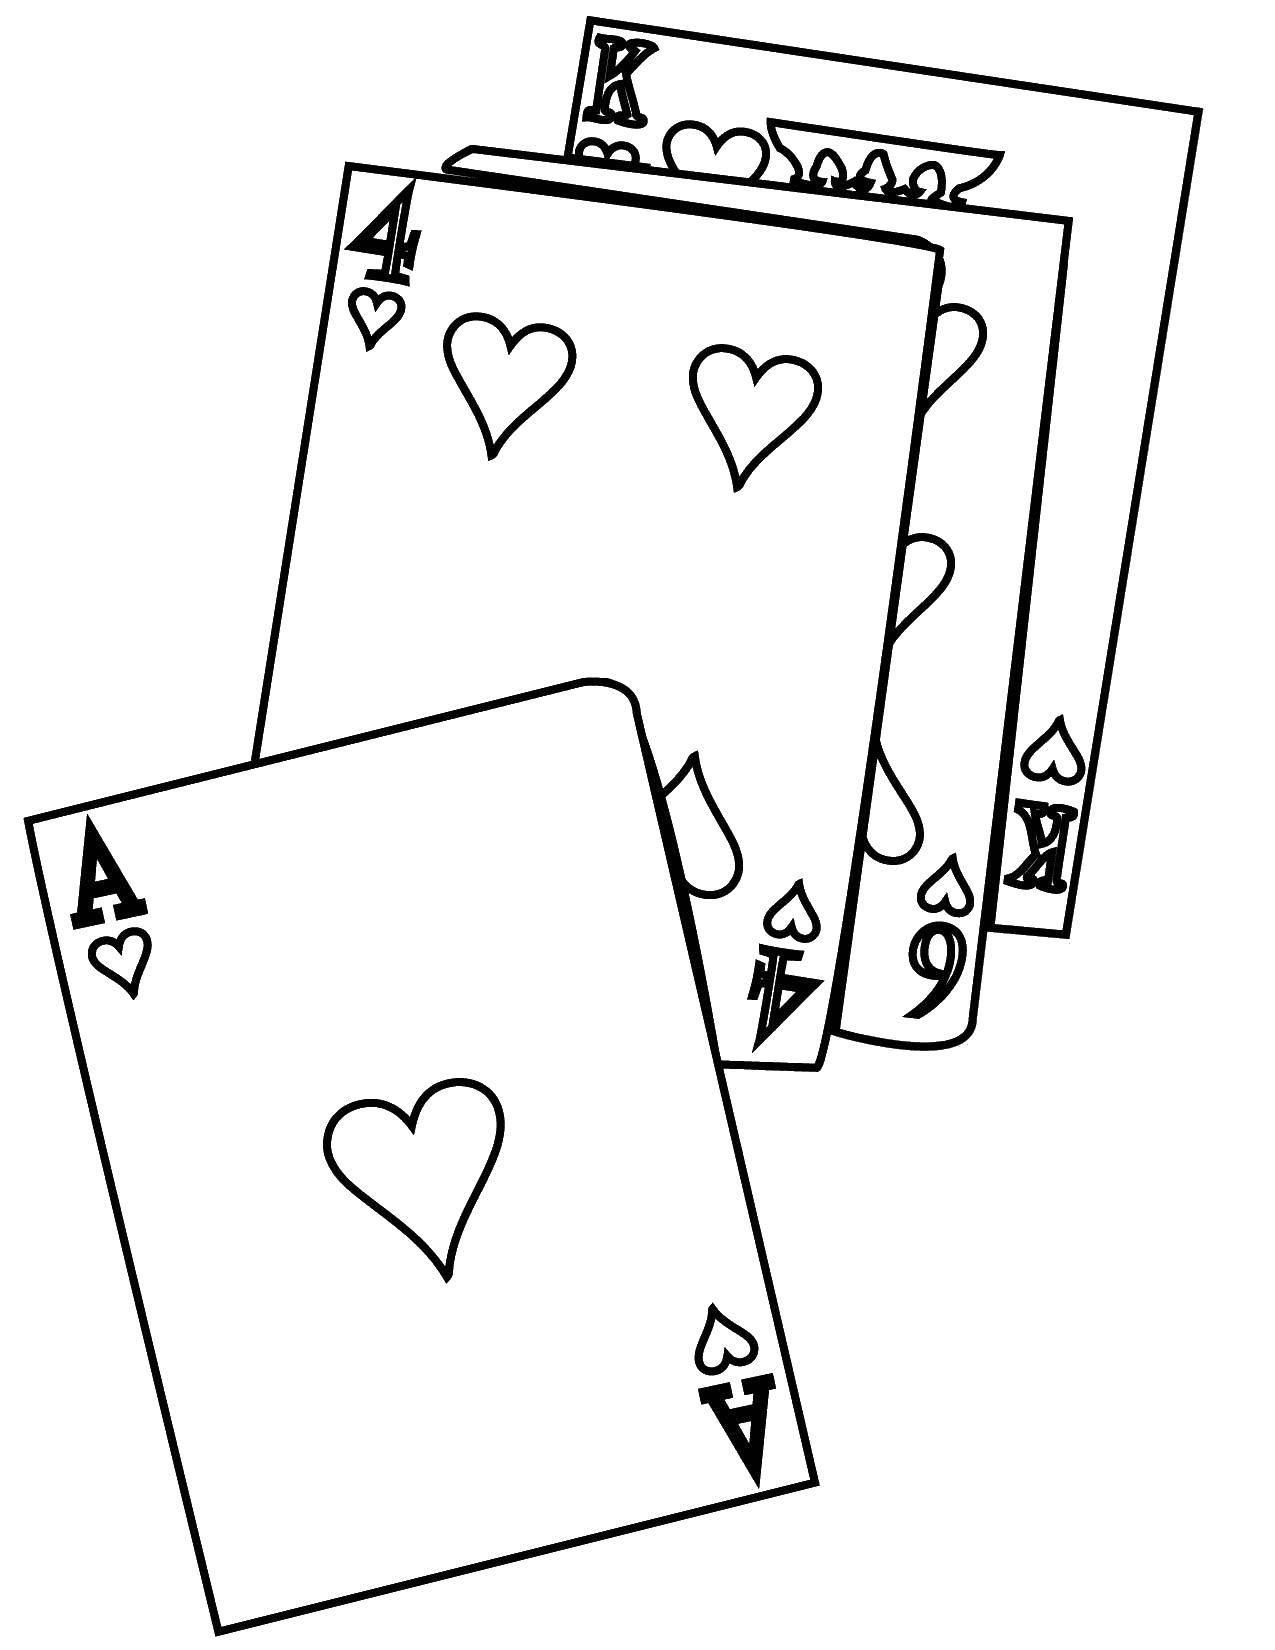 Coloring Card. Category games. Tags:  Games, cards.